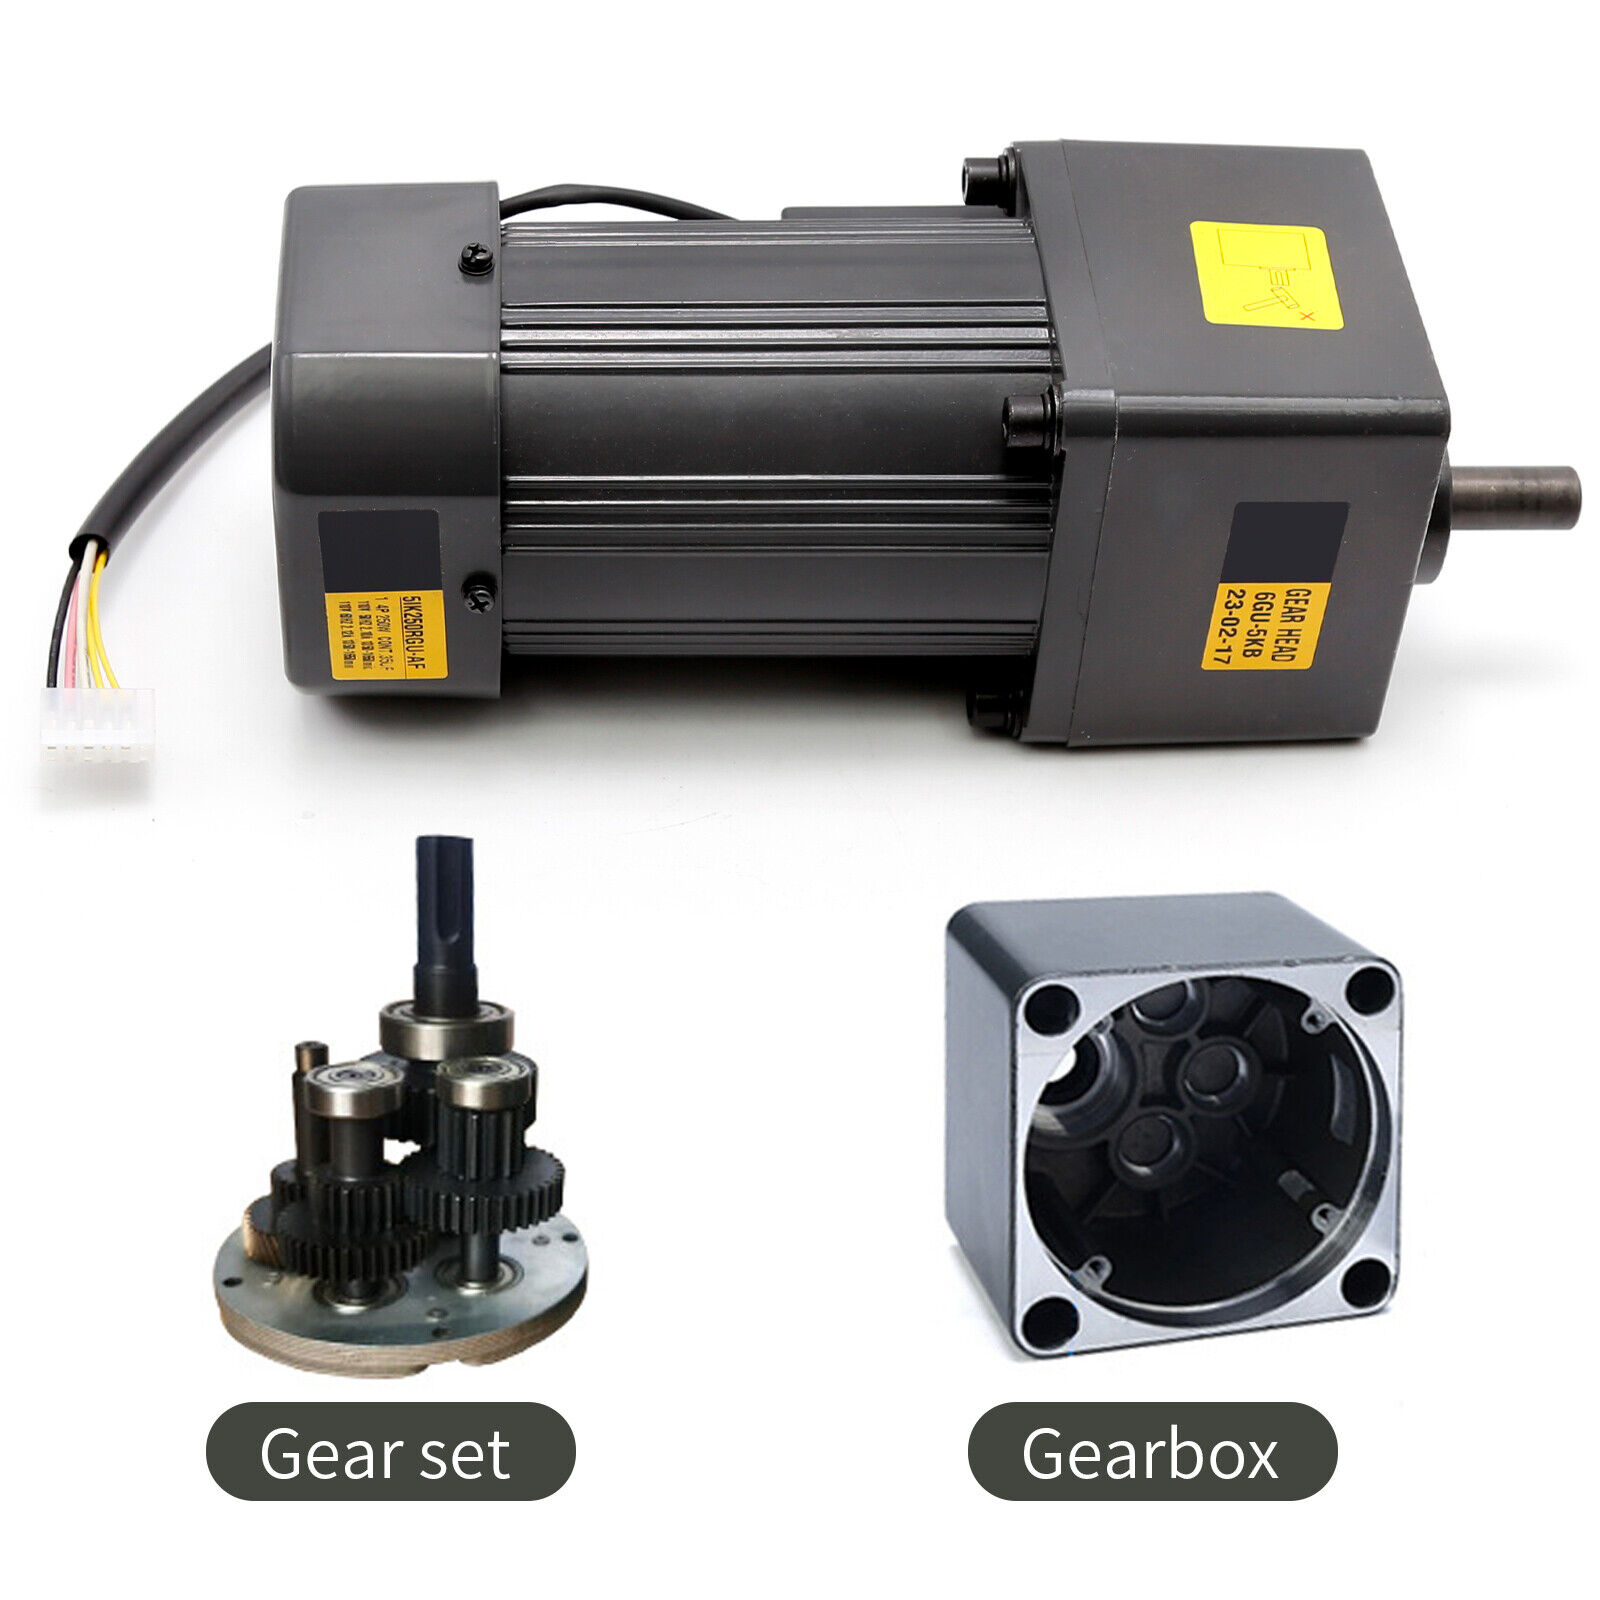 250W 100K 110V Adjustable Variable Gear Reducer Motor & Speed Controlle 13.5RPM